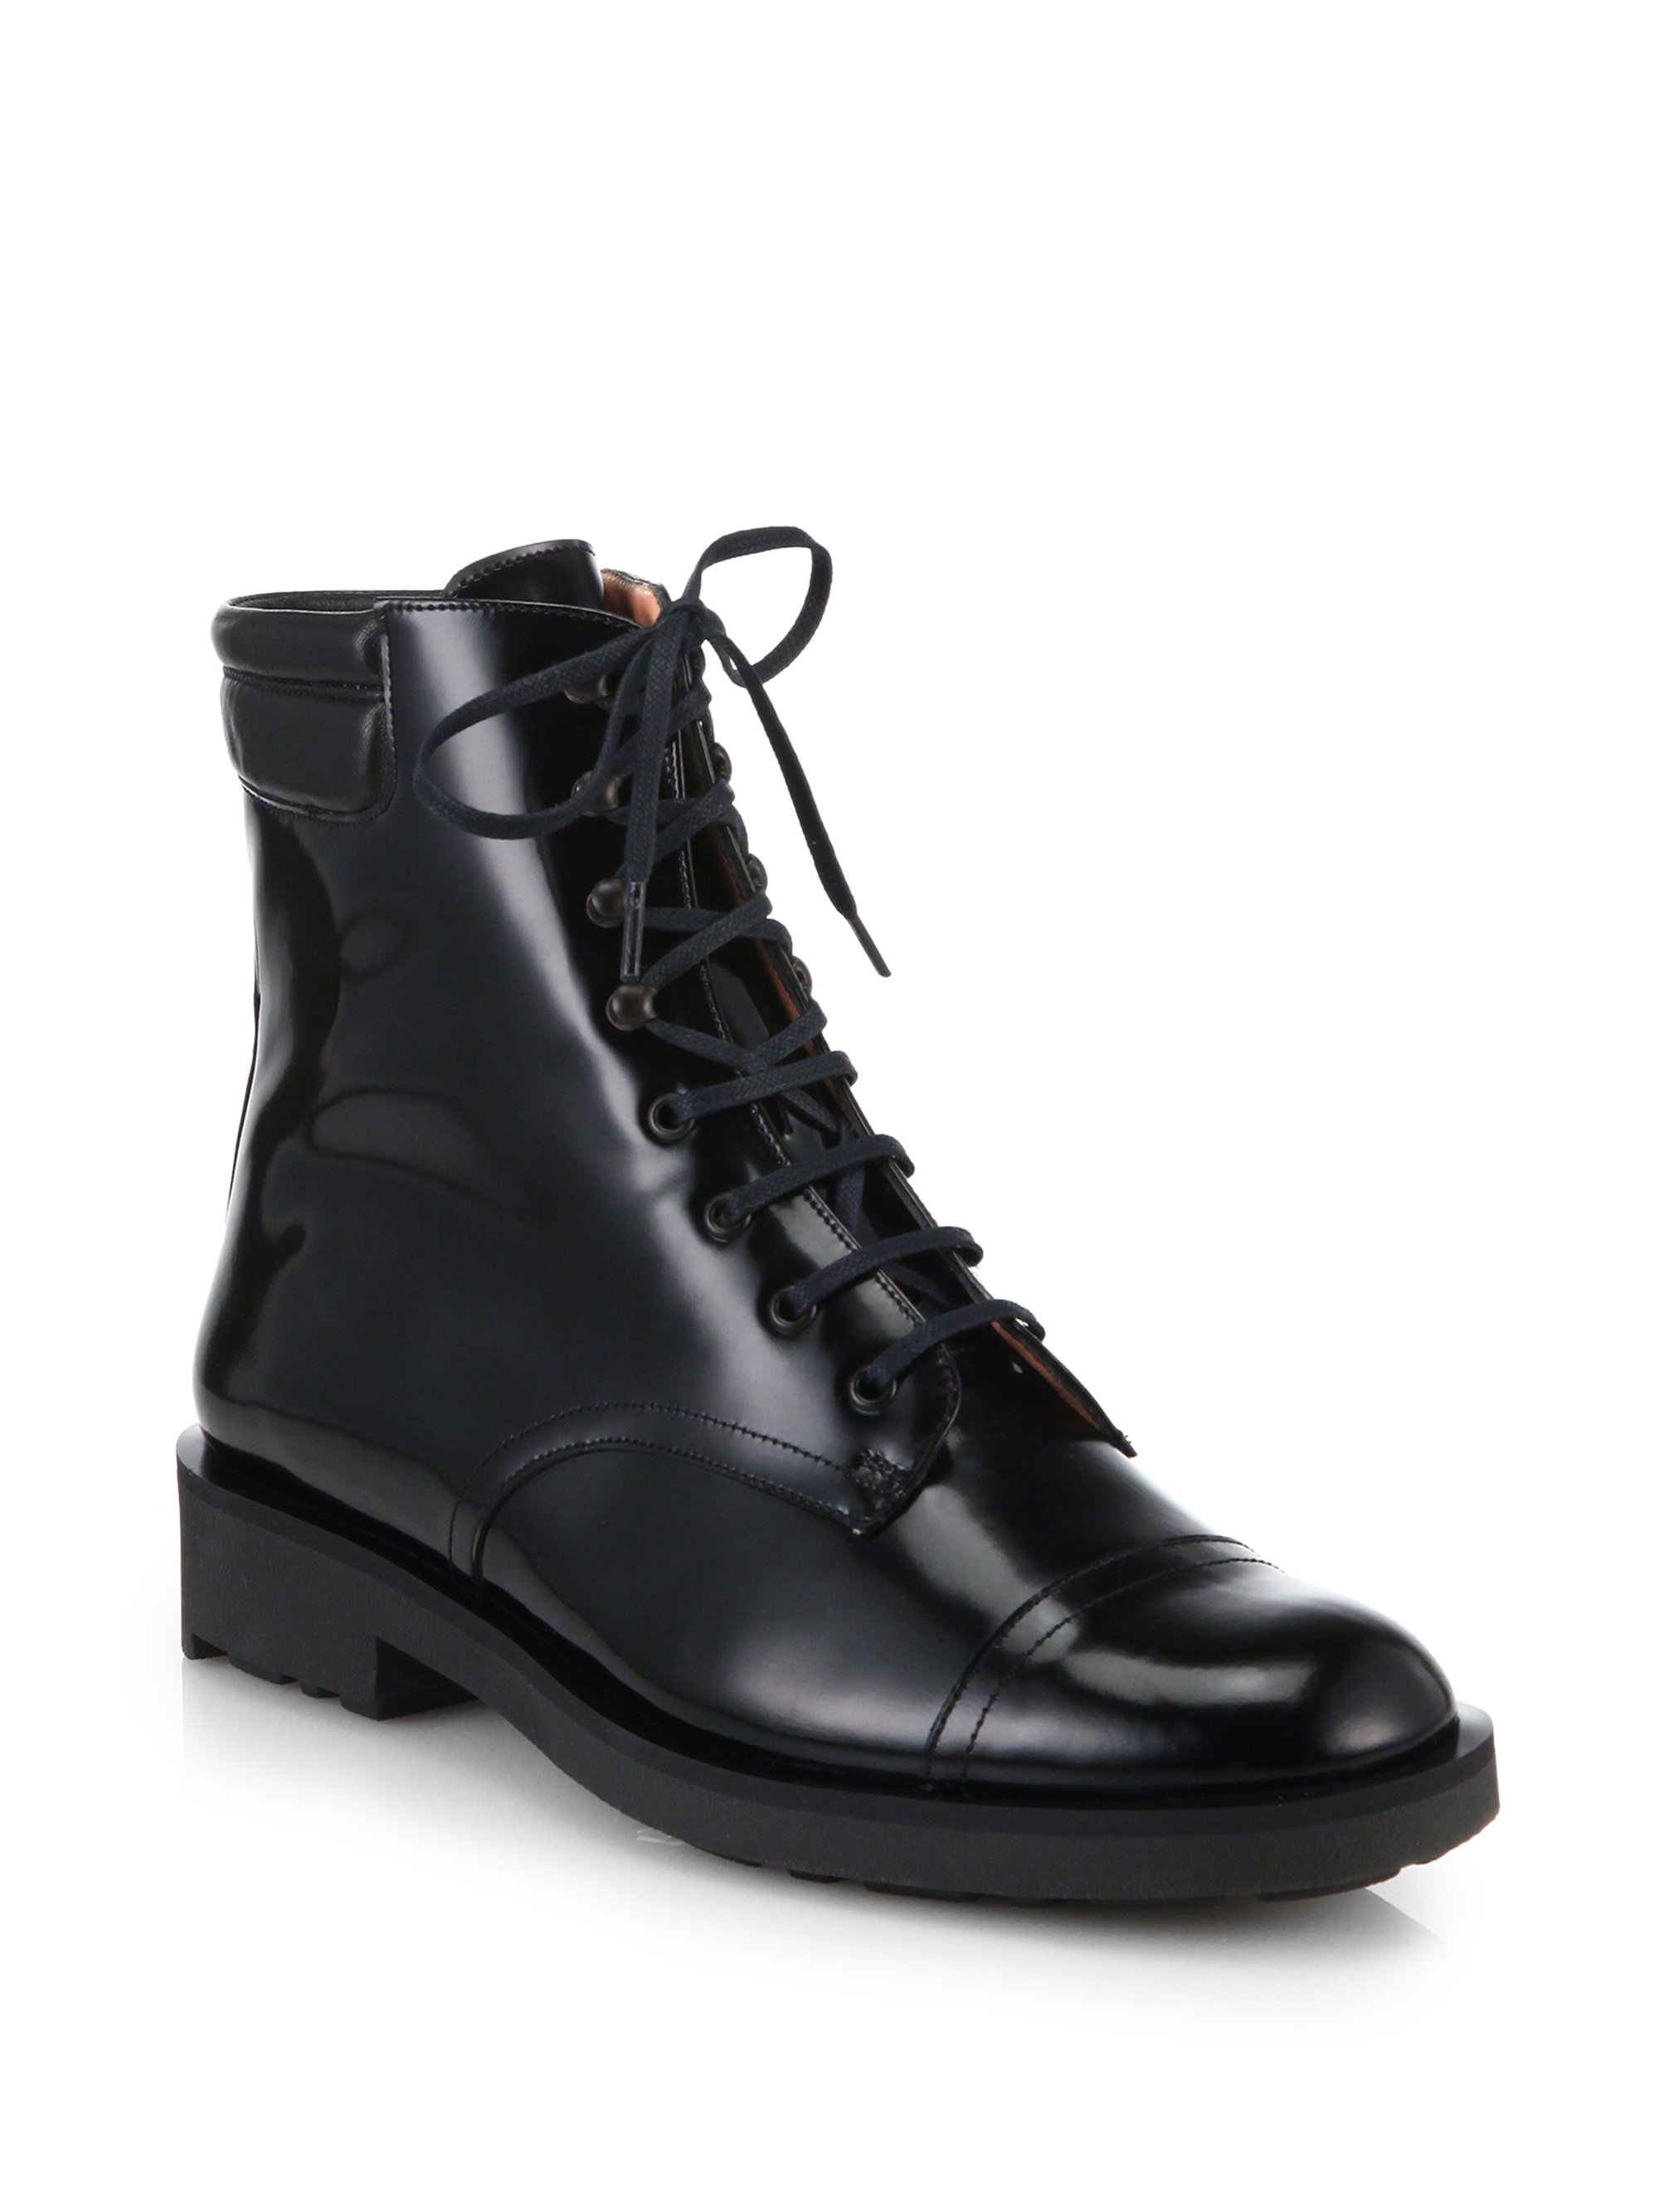 Robert Clergerie Elbie Patent-Leather 